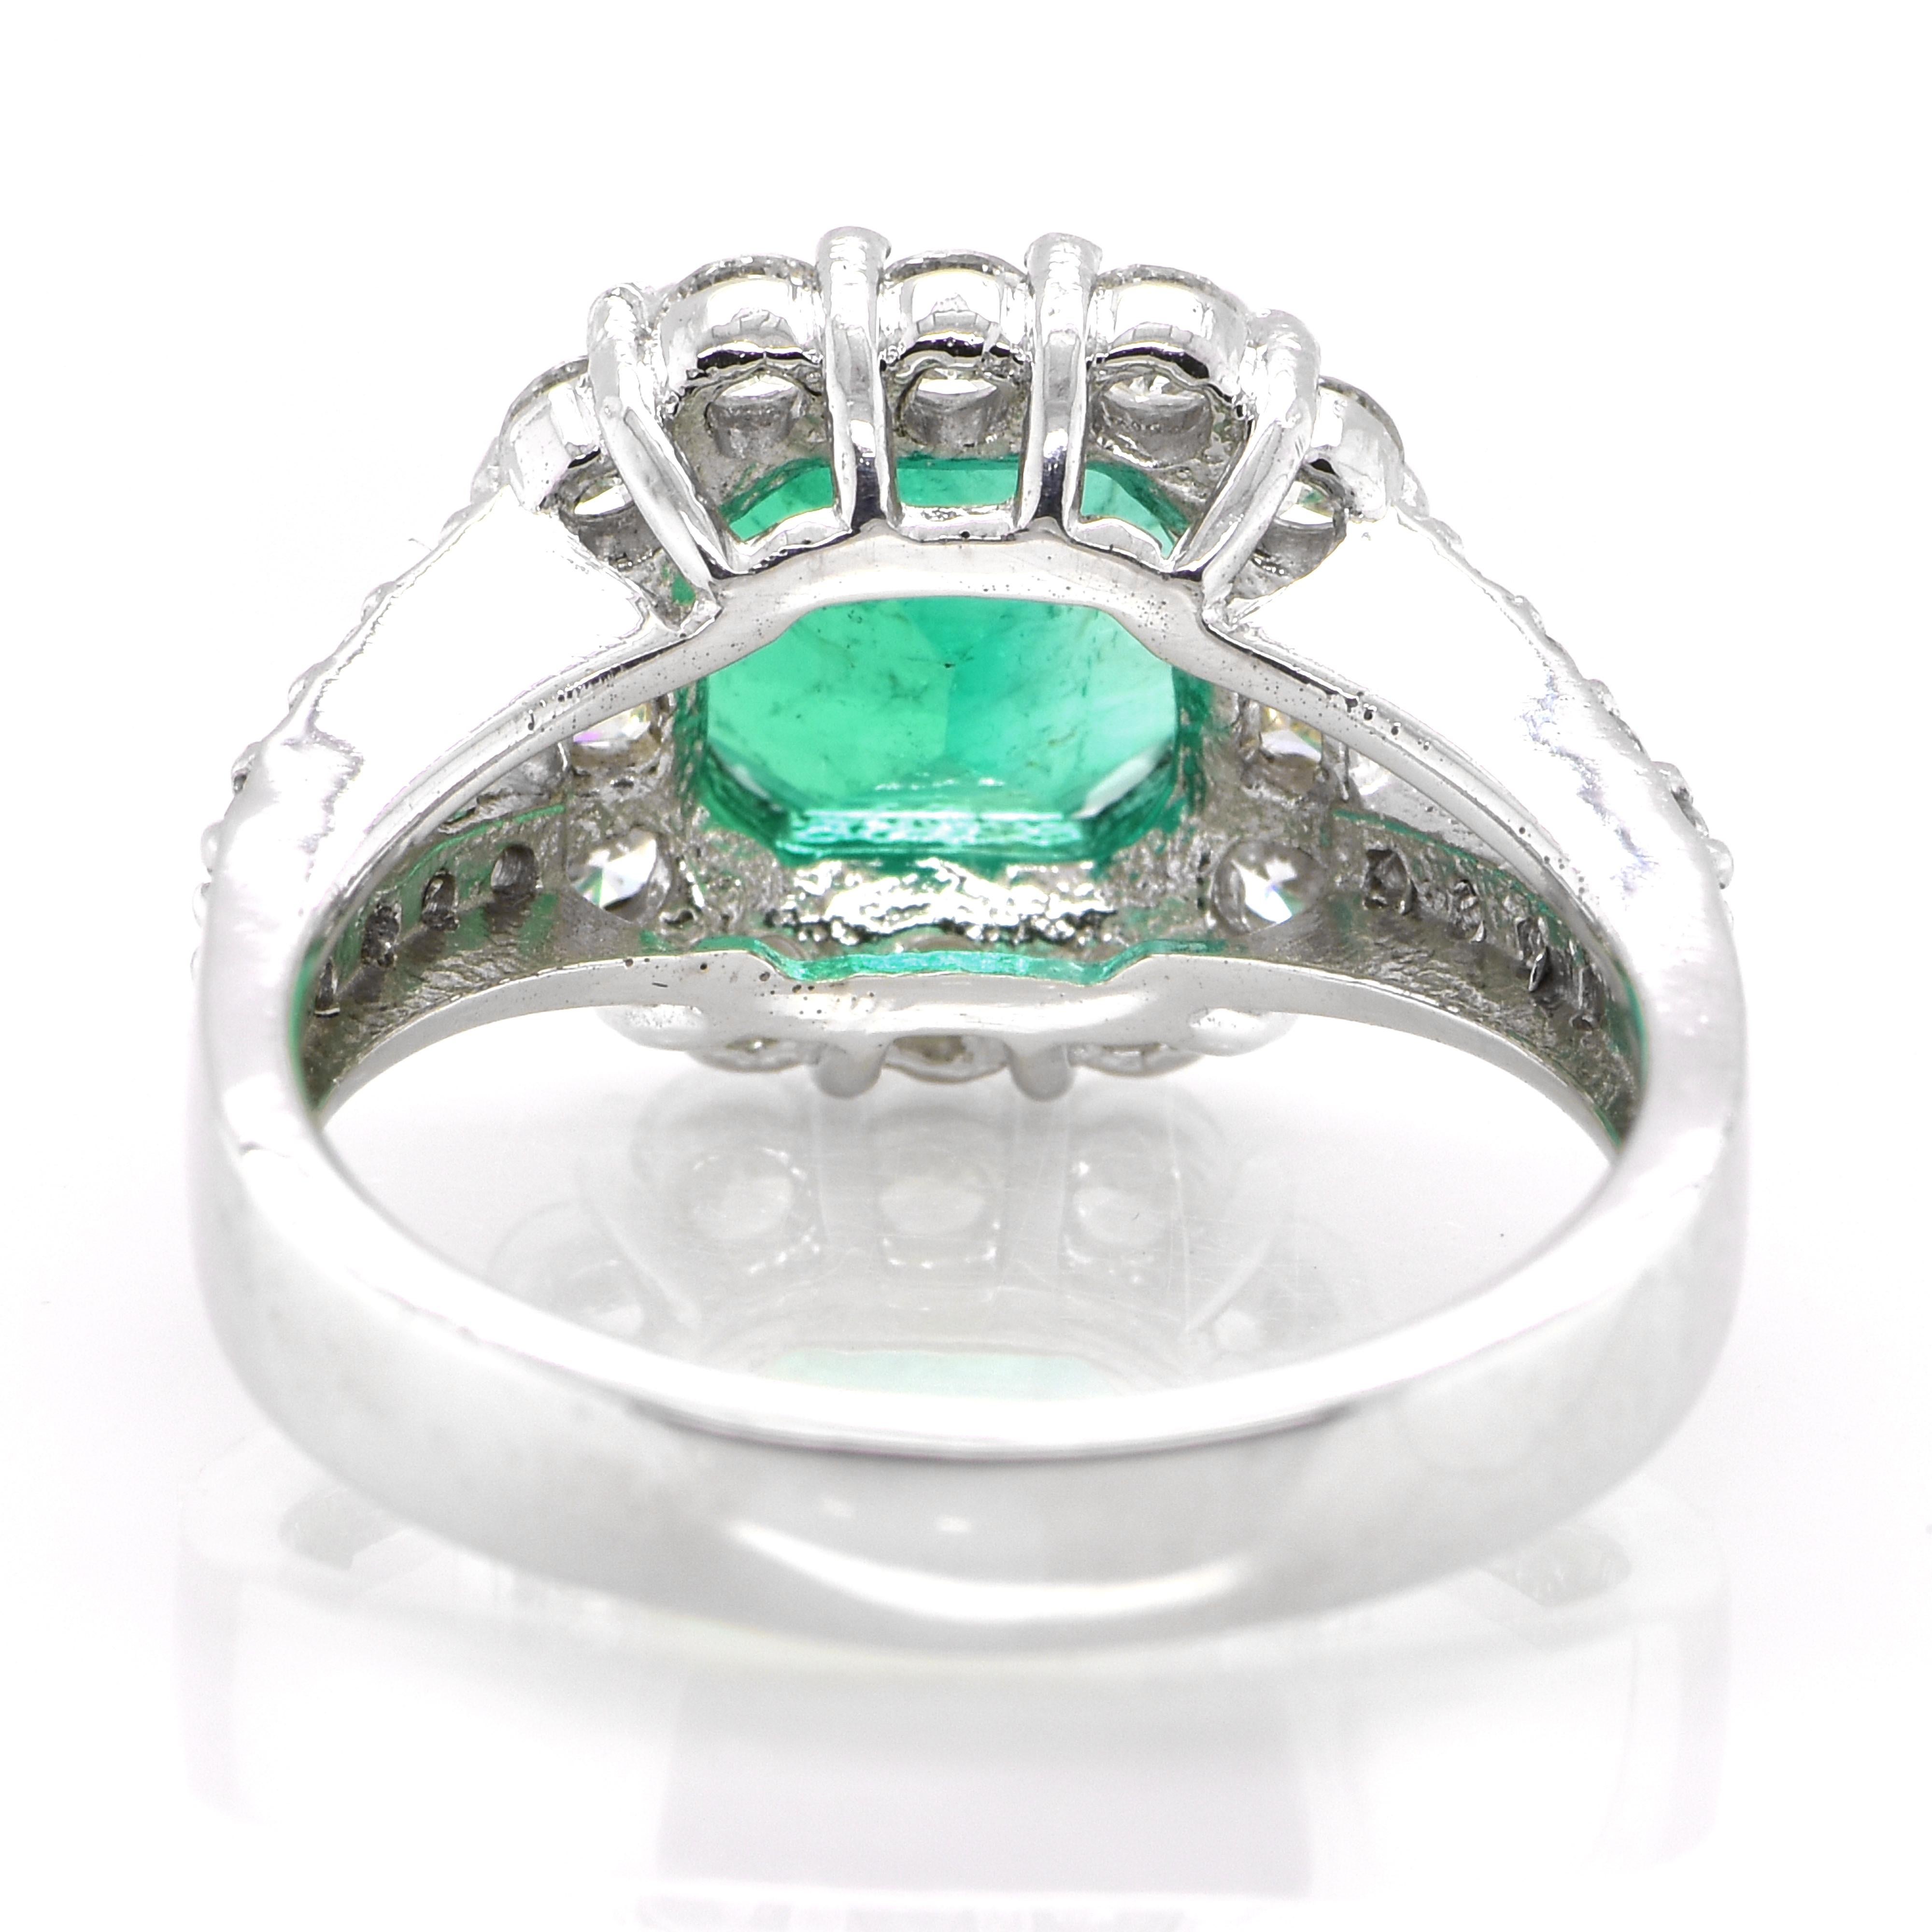 Women's 1.97 Carat Natural Colombian Emerald and Diamond Ring Made in Platinum For Sale